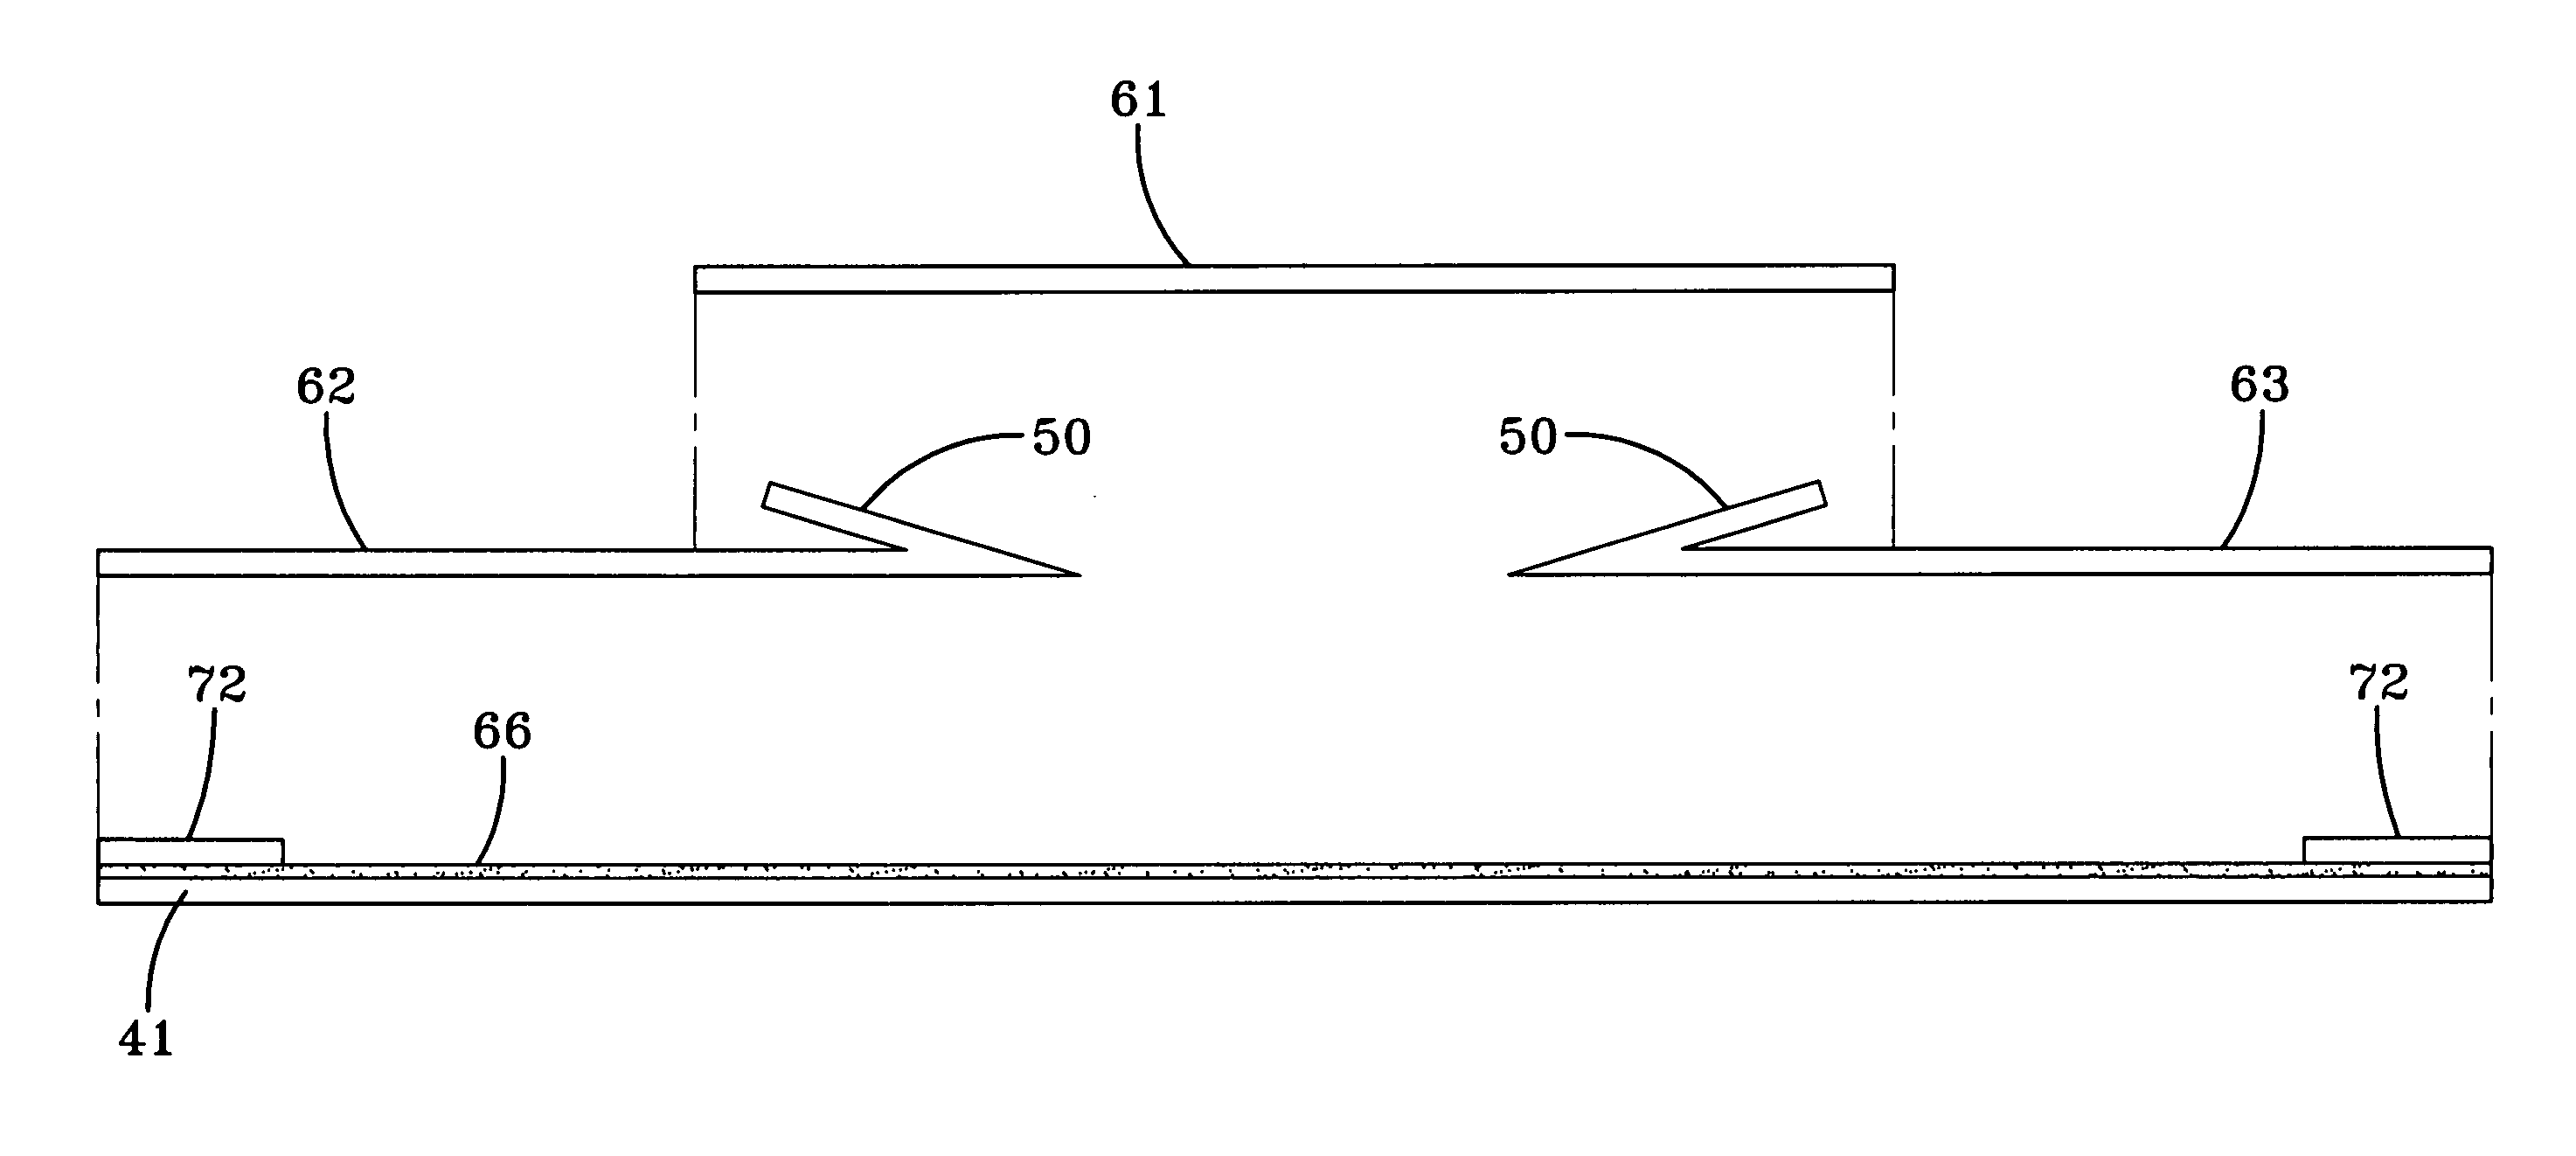 Adhesive tape for an intravascular catheter